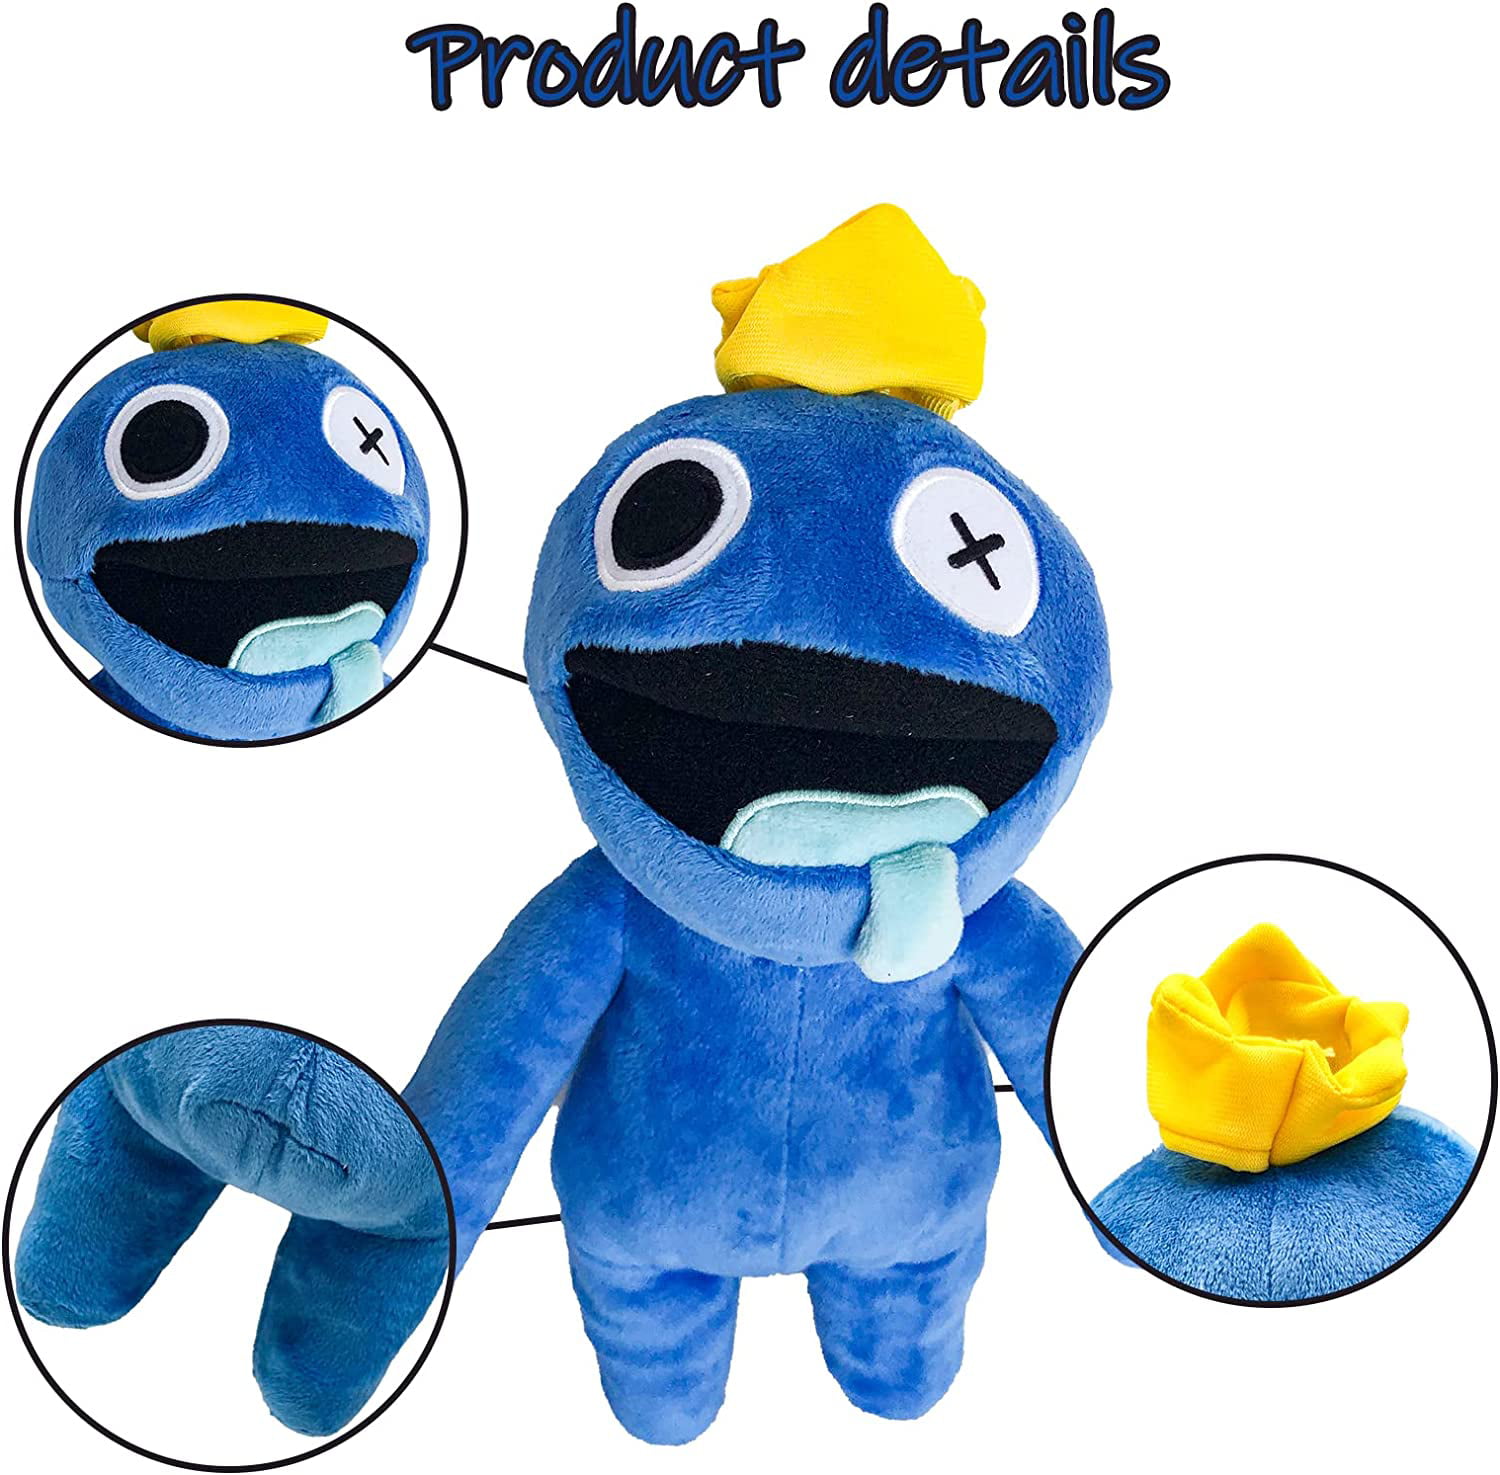 FOAUUH Rainbow Friends Plush Toy - 11.8 inch Blue Rainbow Friends Soft  Stuffed Plush Doll Halloween Christmas Birthday Party Gift for Best Friends  and Kids(Blue+Pink) 